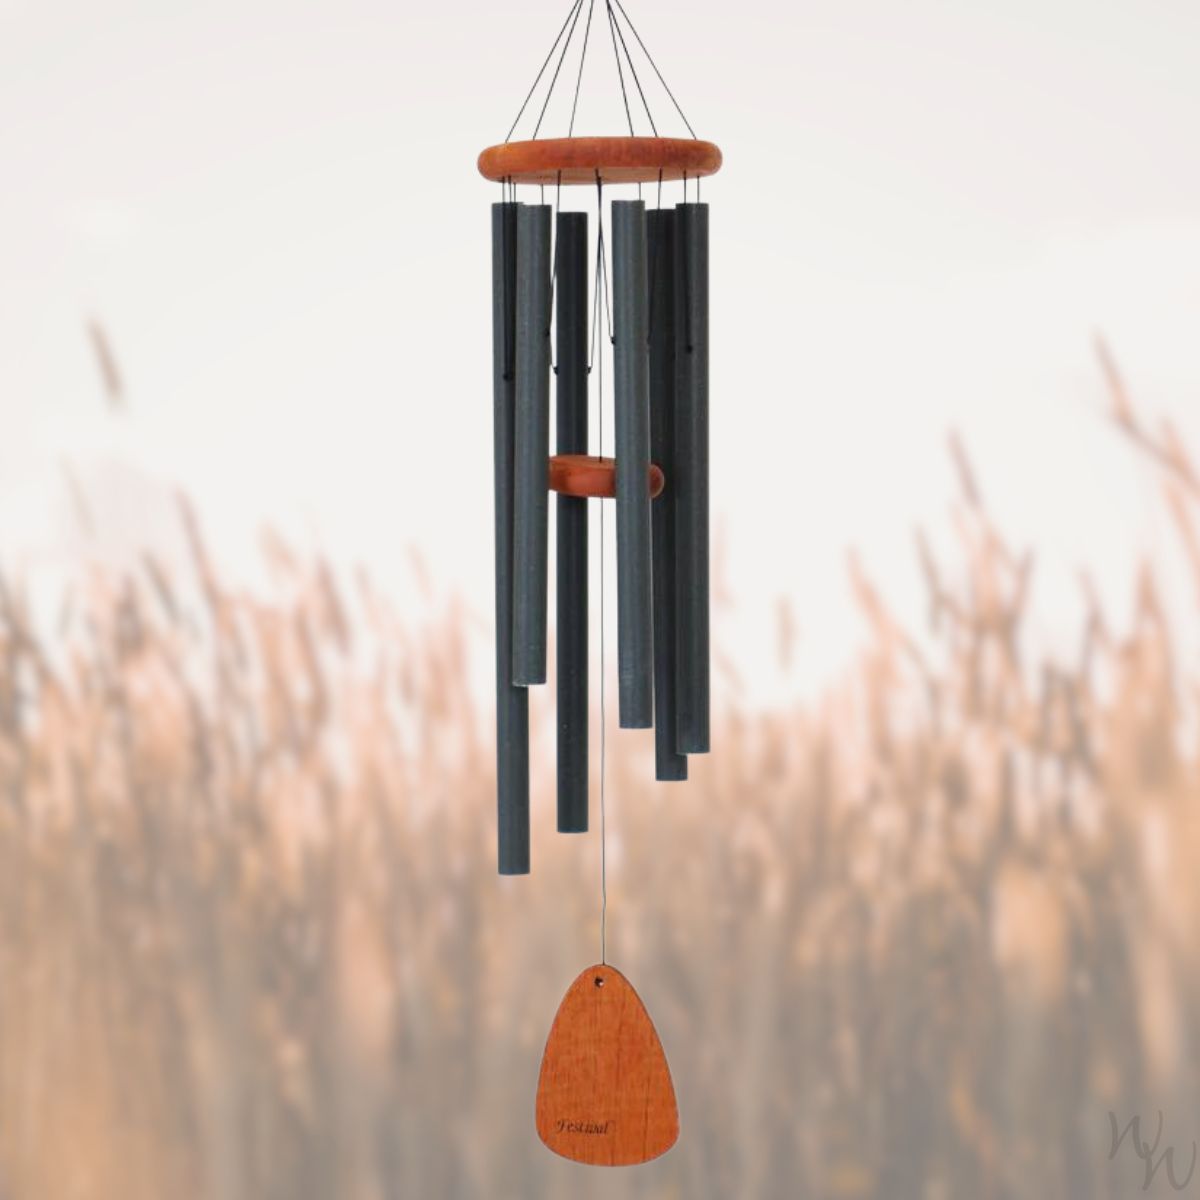 Festival 42-inch 6-Tube Wind Chime in Forest Green